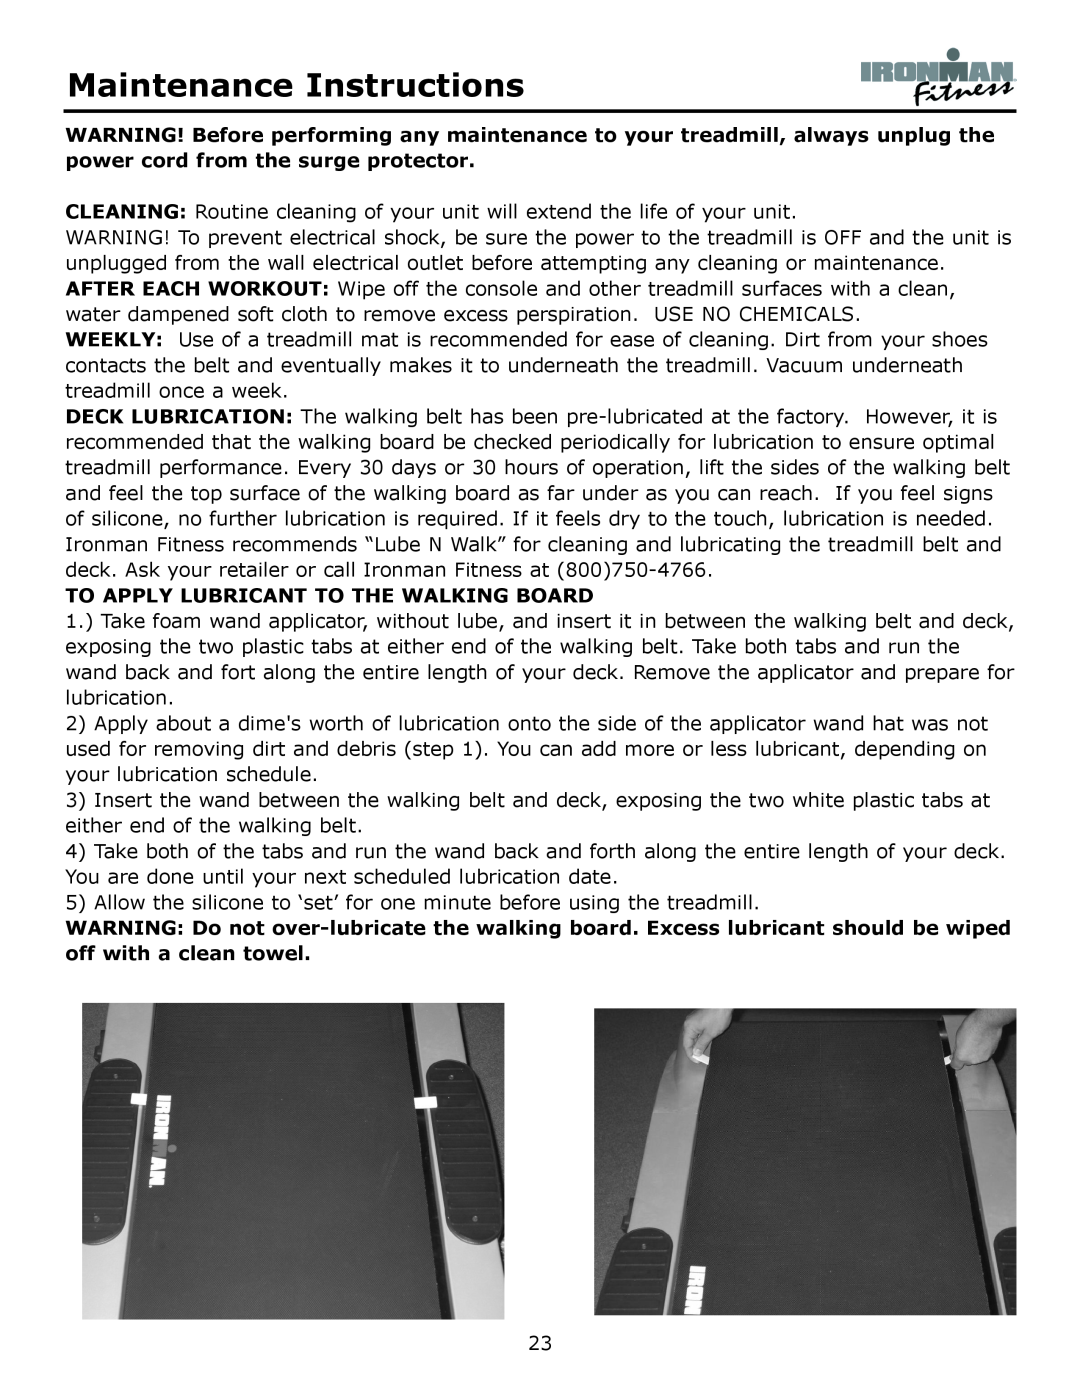 Ironman Fitness Envision owner manual Maintenance Instructions 